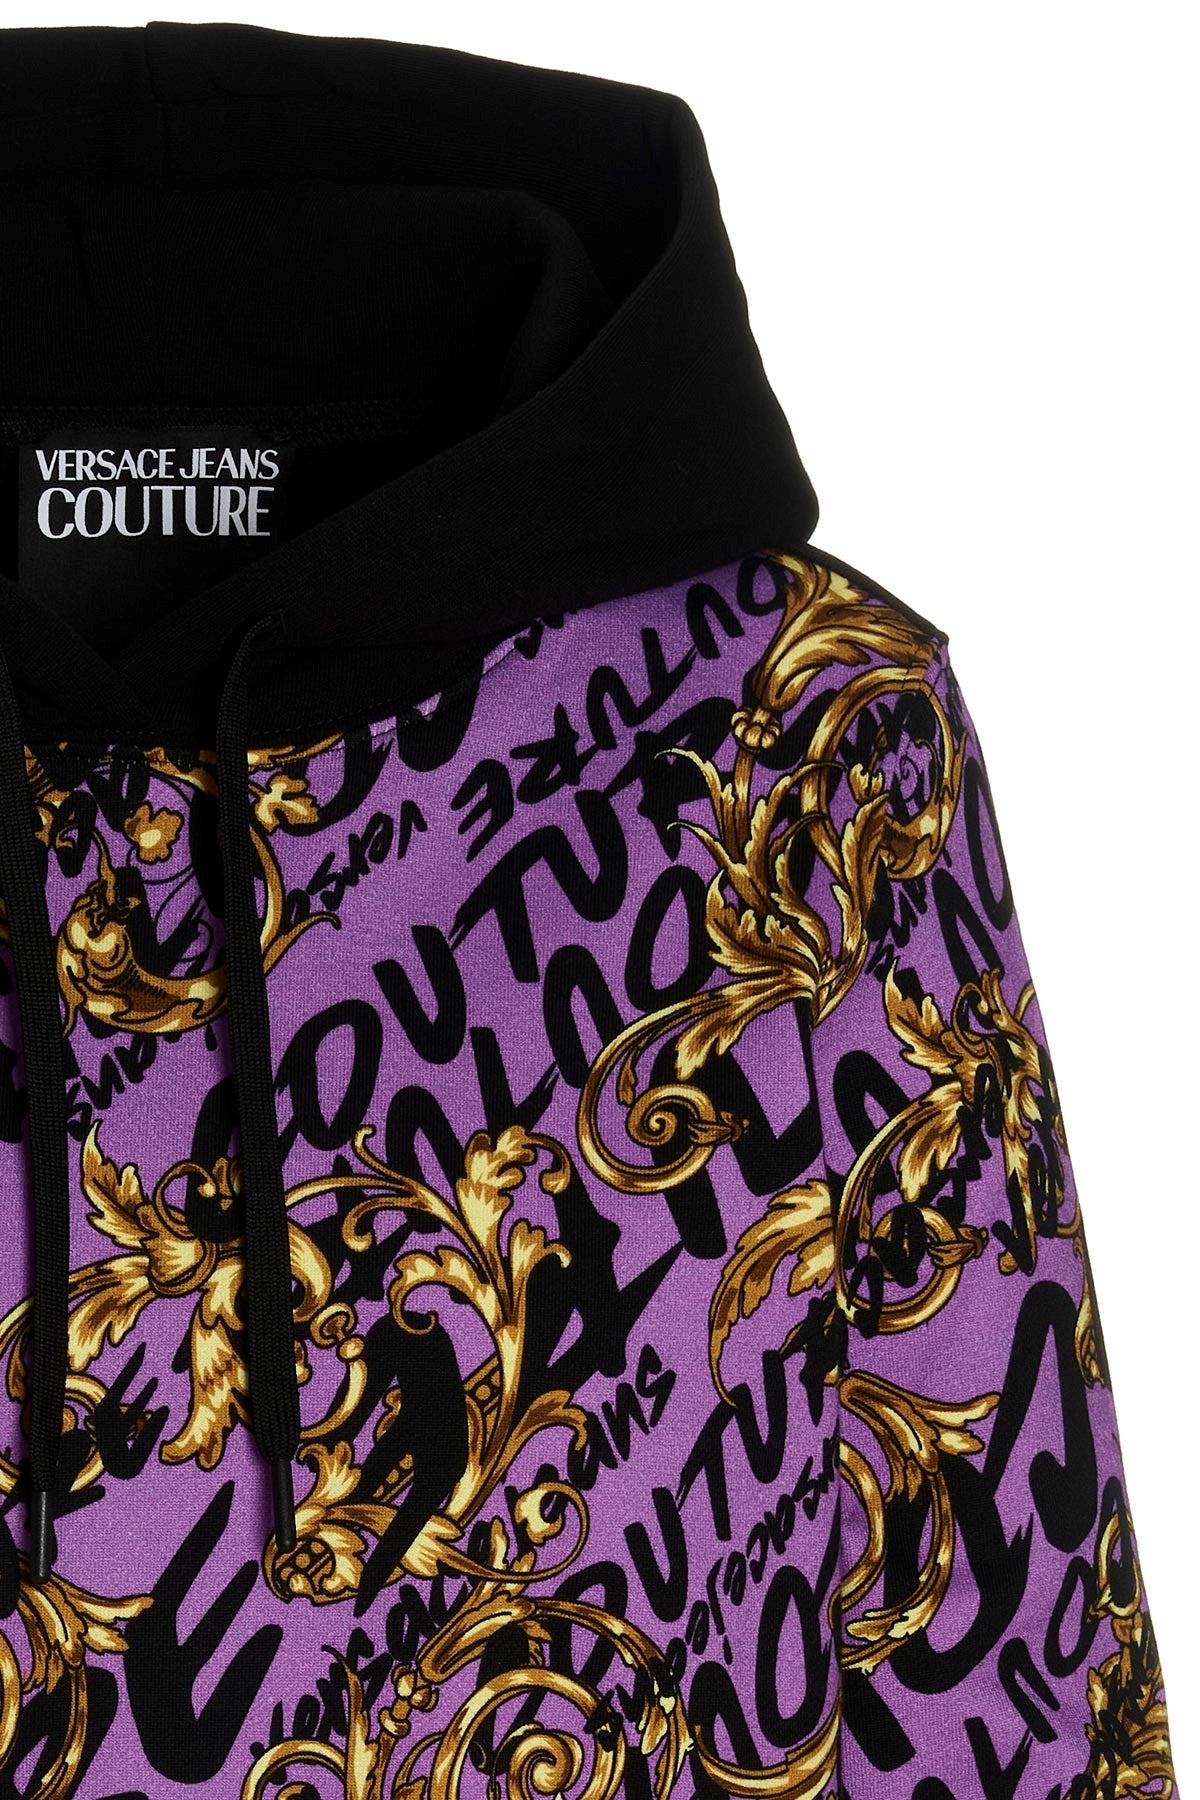 Versace Jeans Couture dukserica